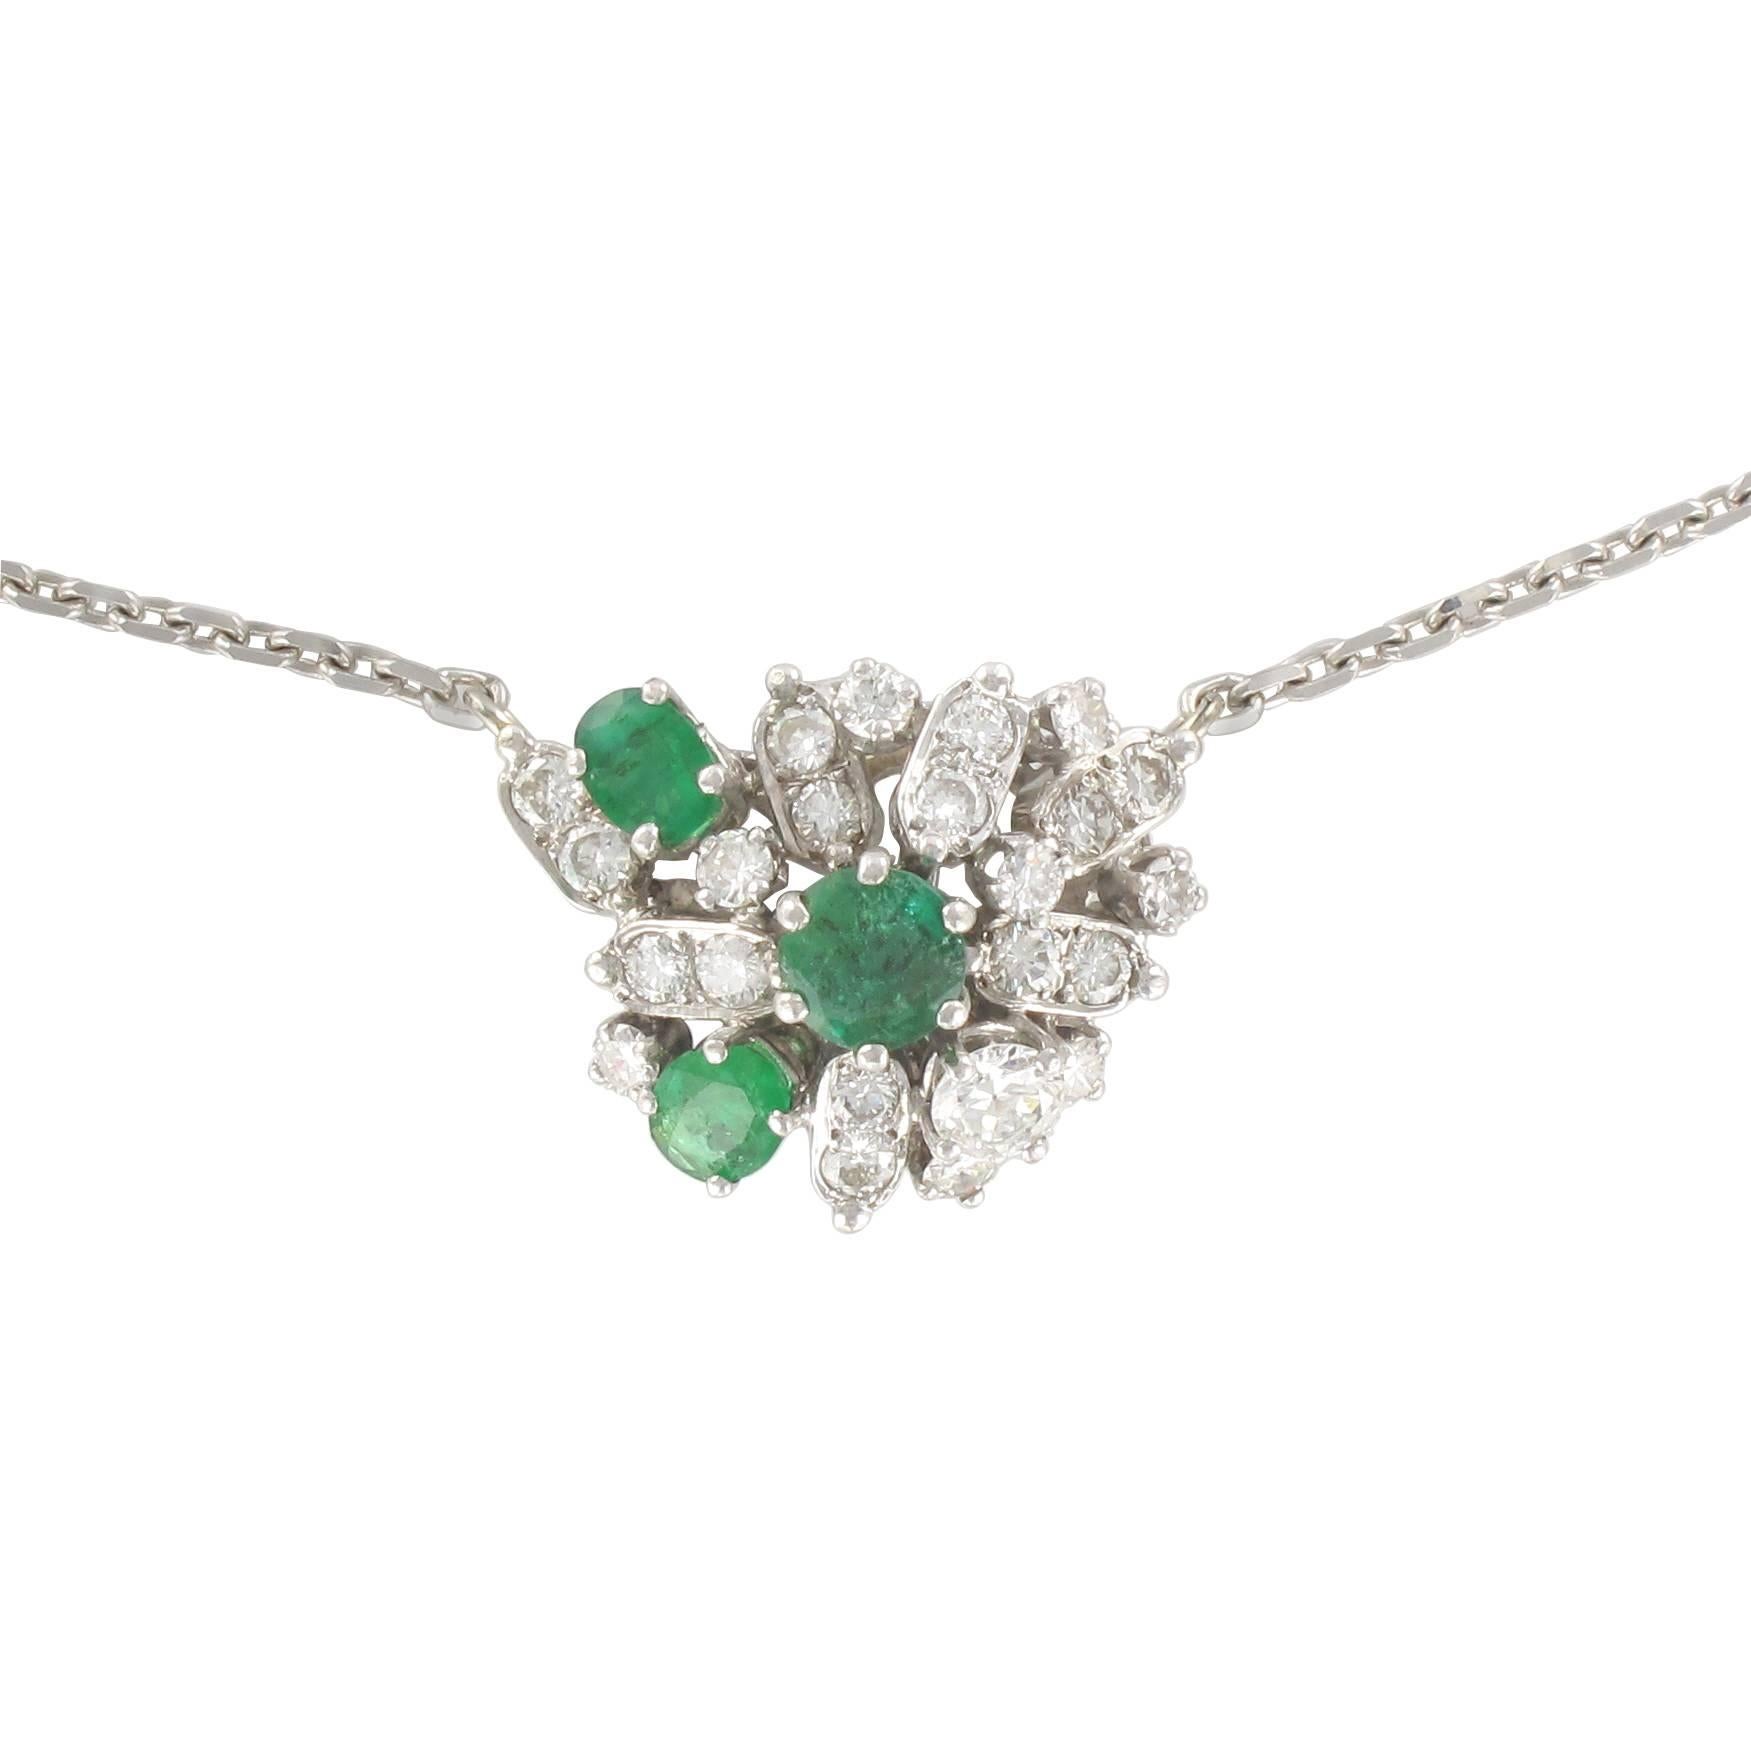 French 1970s Vintage 18 Carat White Gold Diamond Emerald Chain and Pendant